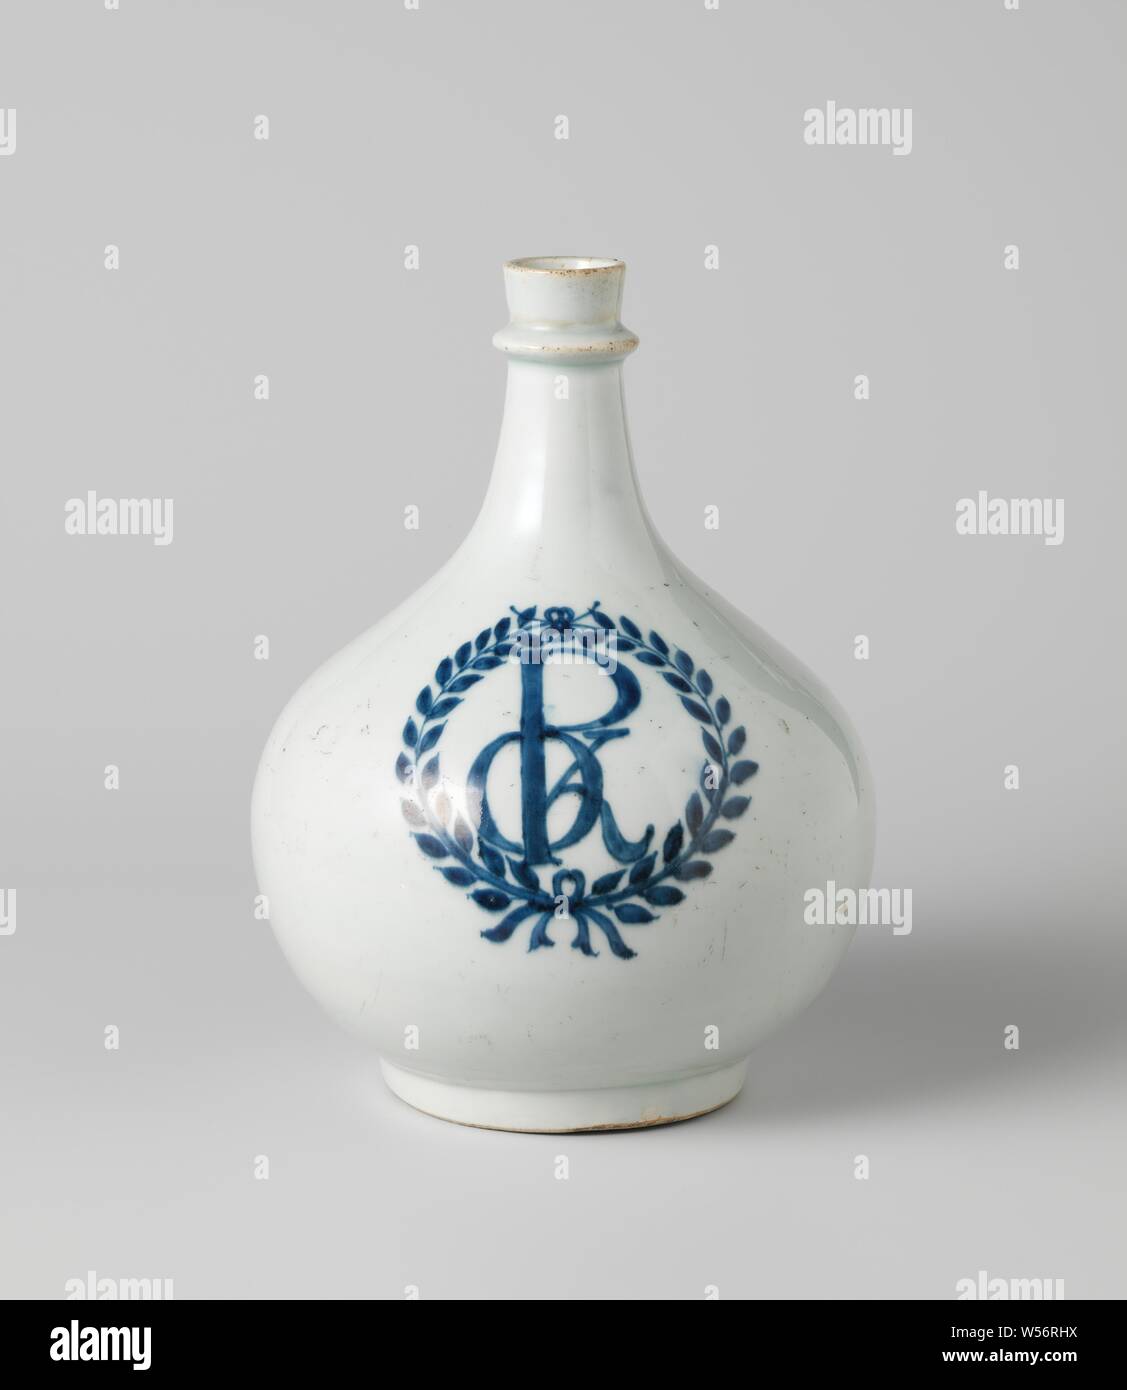 Oil jug made of porcelain, Diabolo shaped porcelain jug with narrow neck, light blue-green in color. On the belly in deep blue the letters KPO (= Kaja Poeti Oil) in round frame formed by two curved branches, tied at the bottom with a bow. The base is finished in a Chinese way, Japan, Dutch East India Company, anonymous, c. 1665, porcelain (material), vitrification, h 23.8 cm × d 17.5 cm Stock Photo